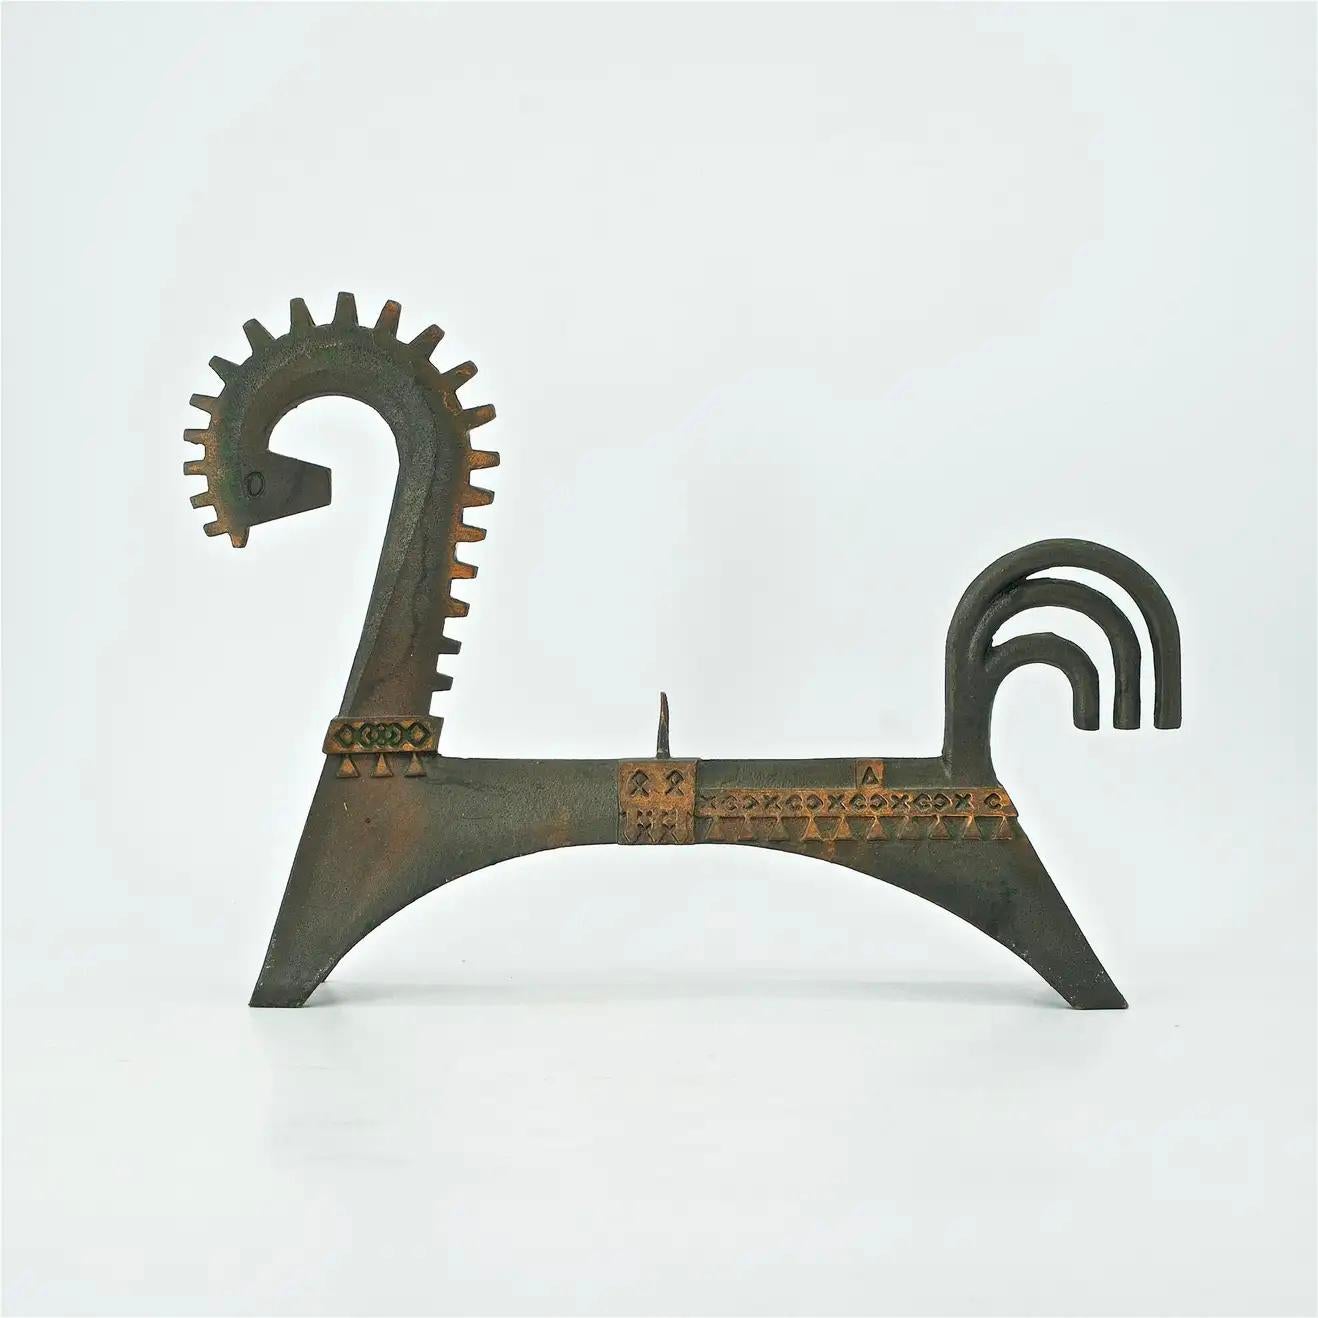 Stylized plated or washed cast metal horse candleholder, weighs 1 lb.